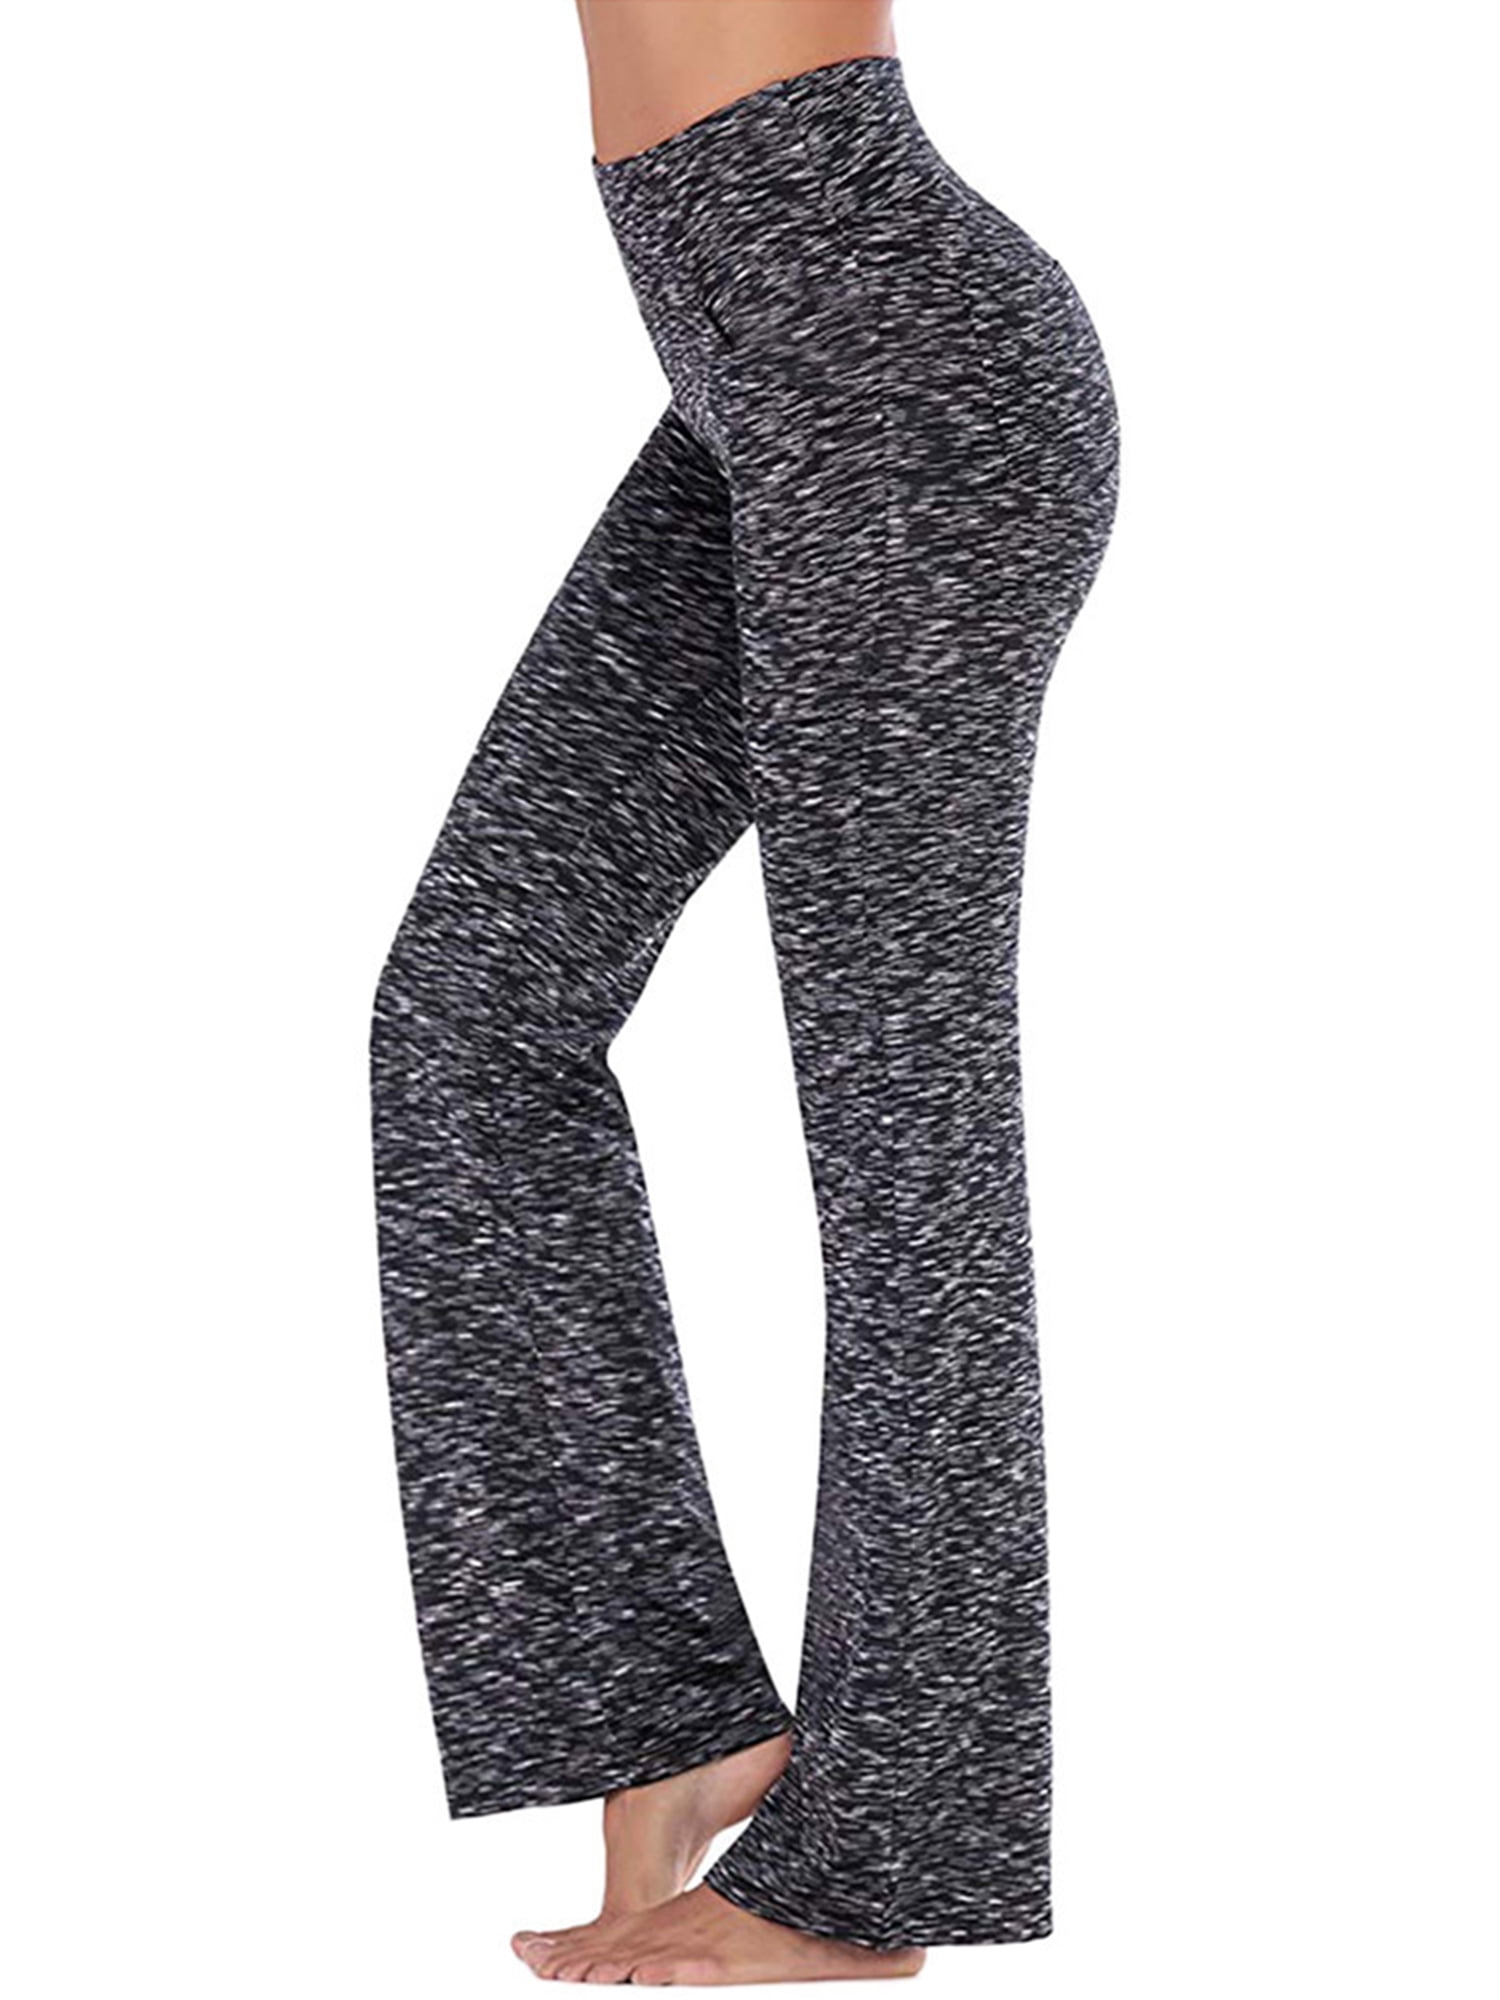 Women's Boot-Cut Yoga Pants Ladies Loungewear Skinny Solid Tummy Control  Workout Non See-Through Bootleg Soft Activewear Althletic Sports Workout  Wear Fitness Leggings Womens Activewear Pants Capris - Walmart.com